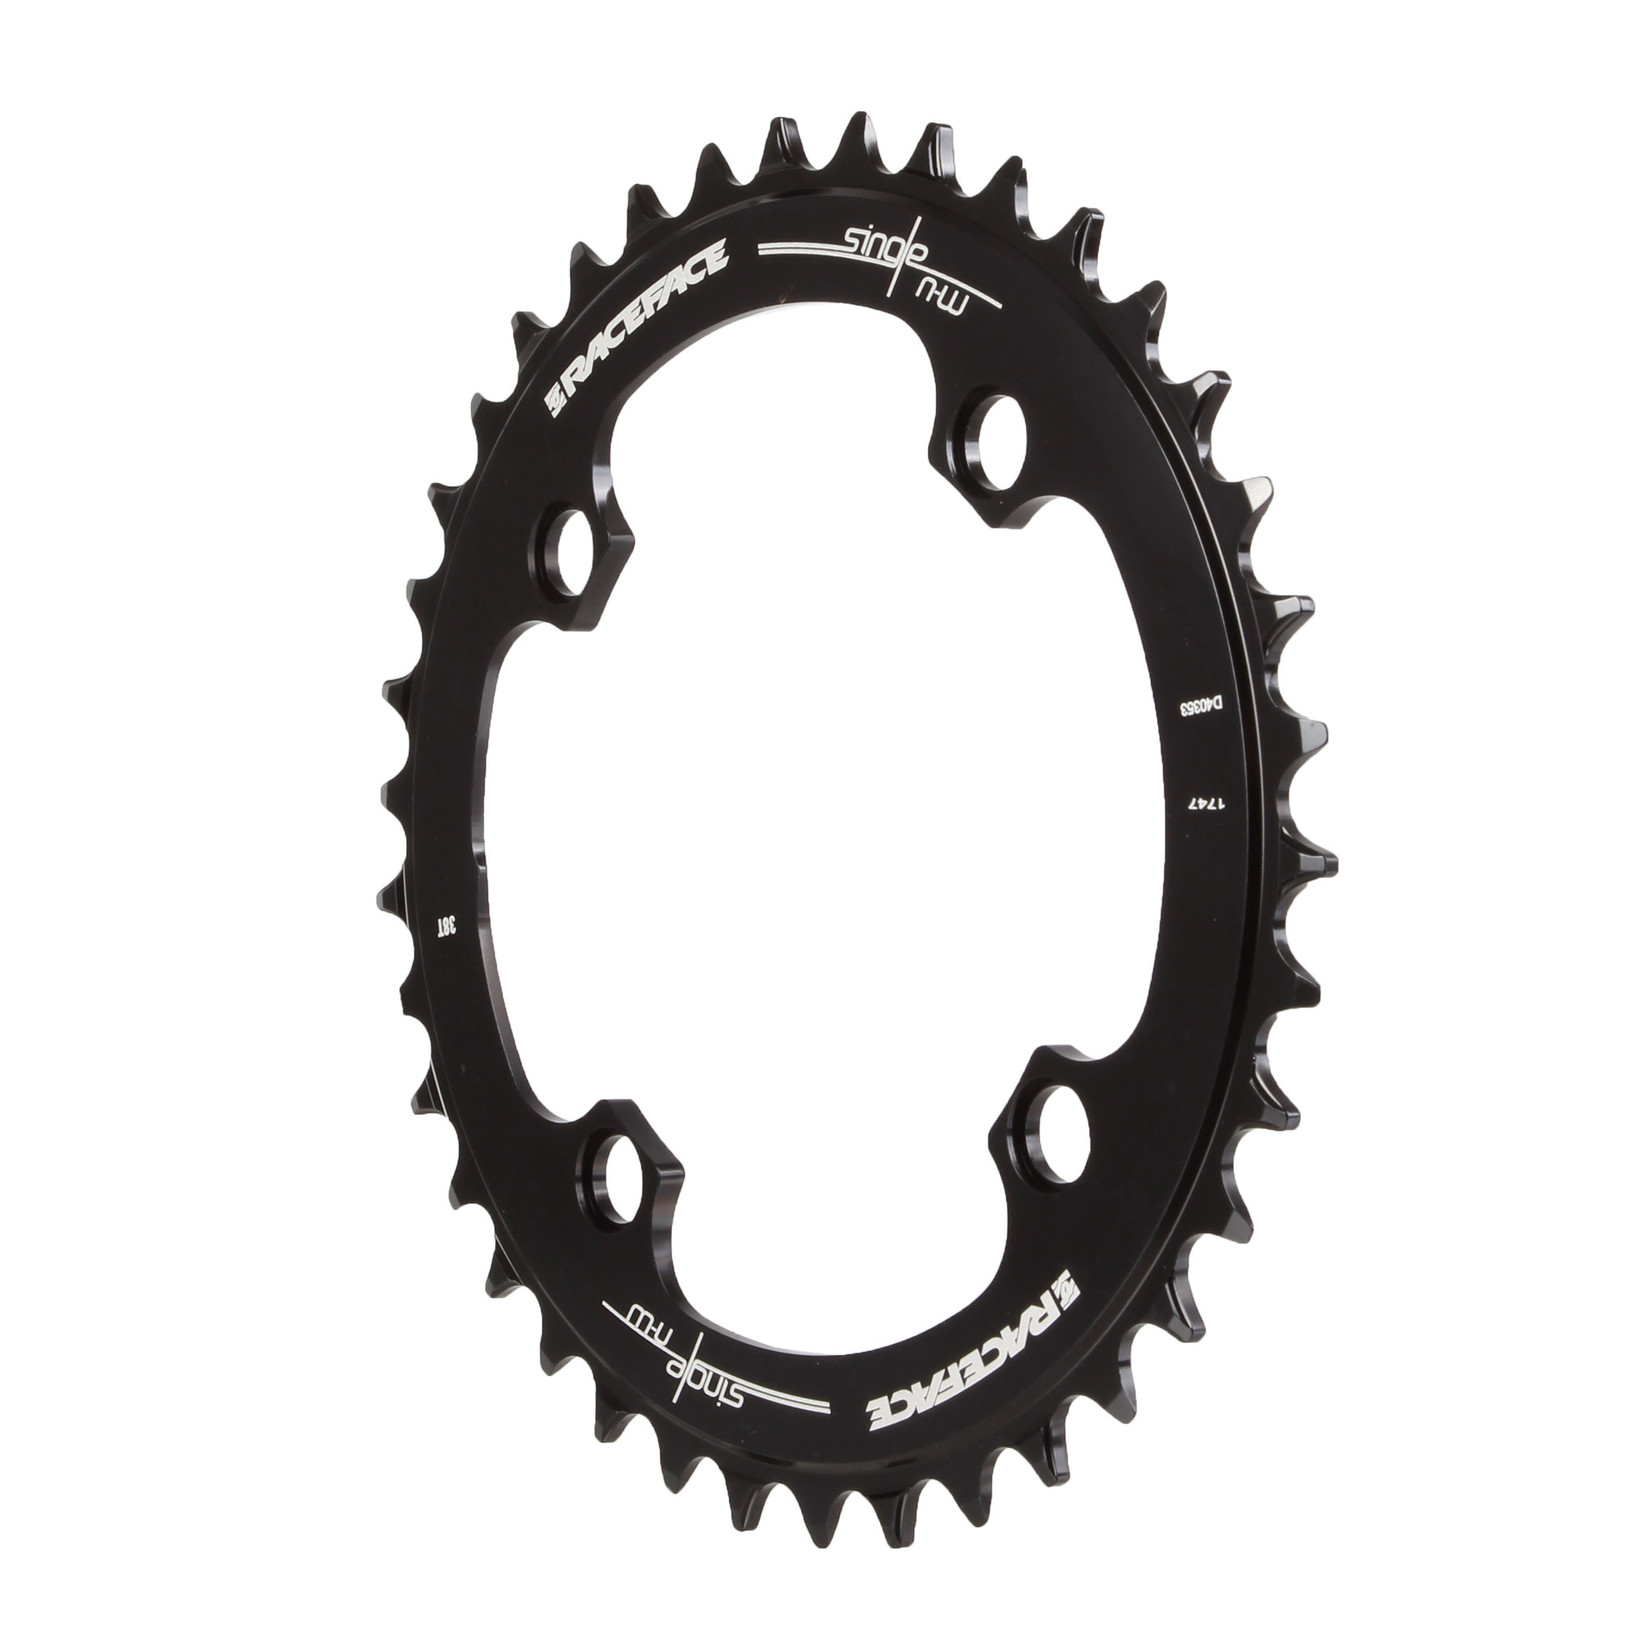 Race Face Narrow Wide Chainring, 104BCD 38T - Black